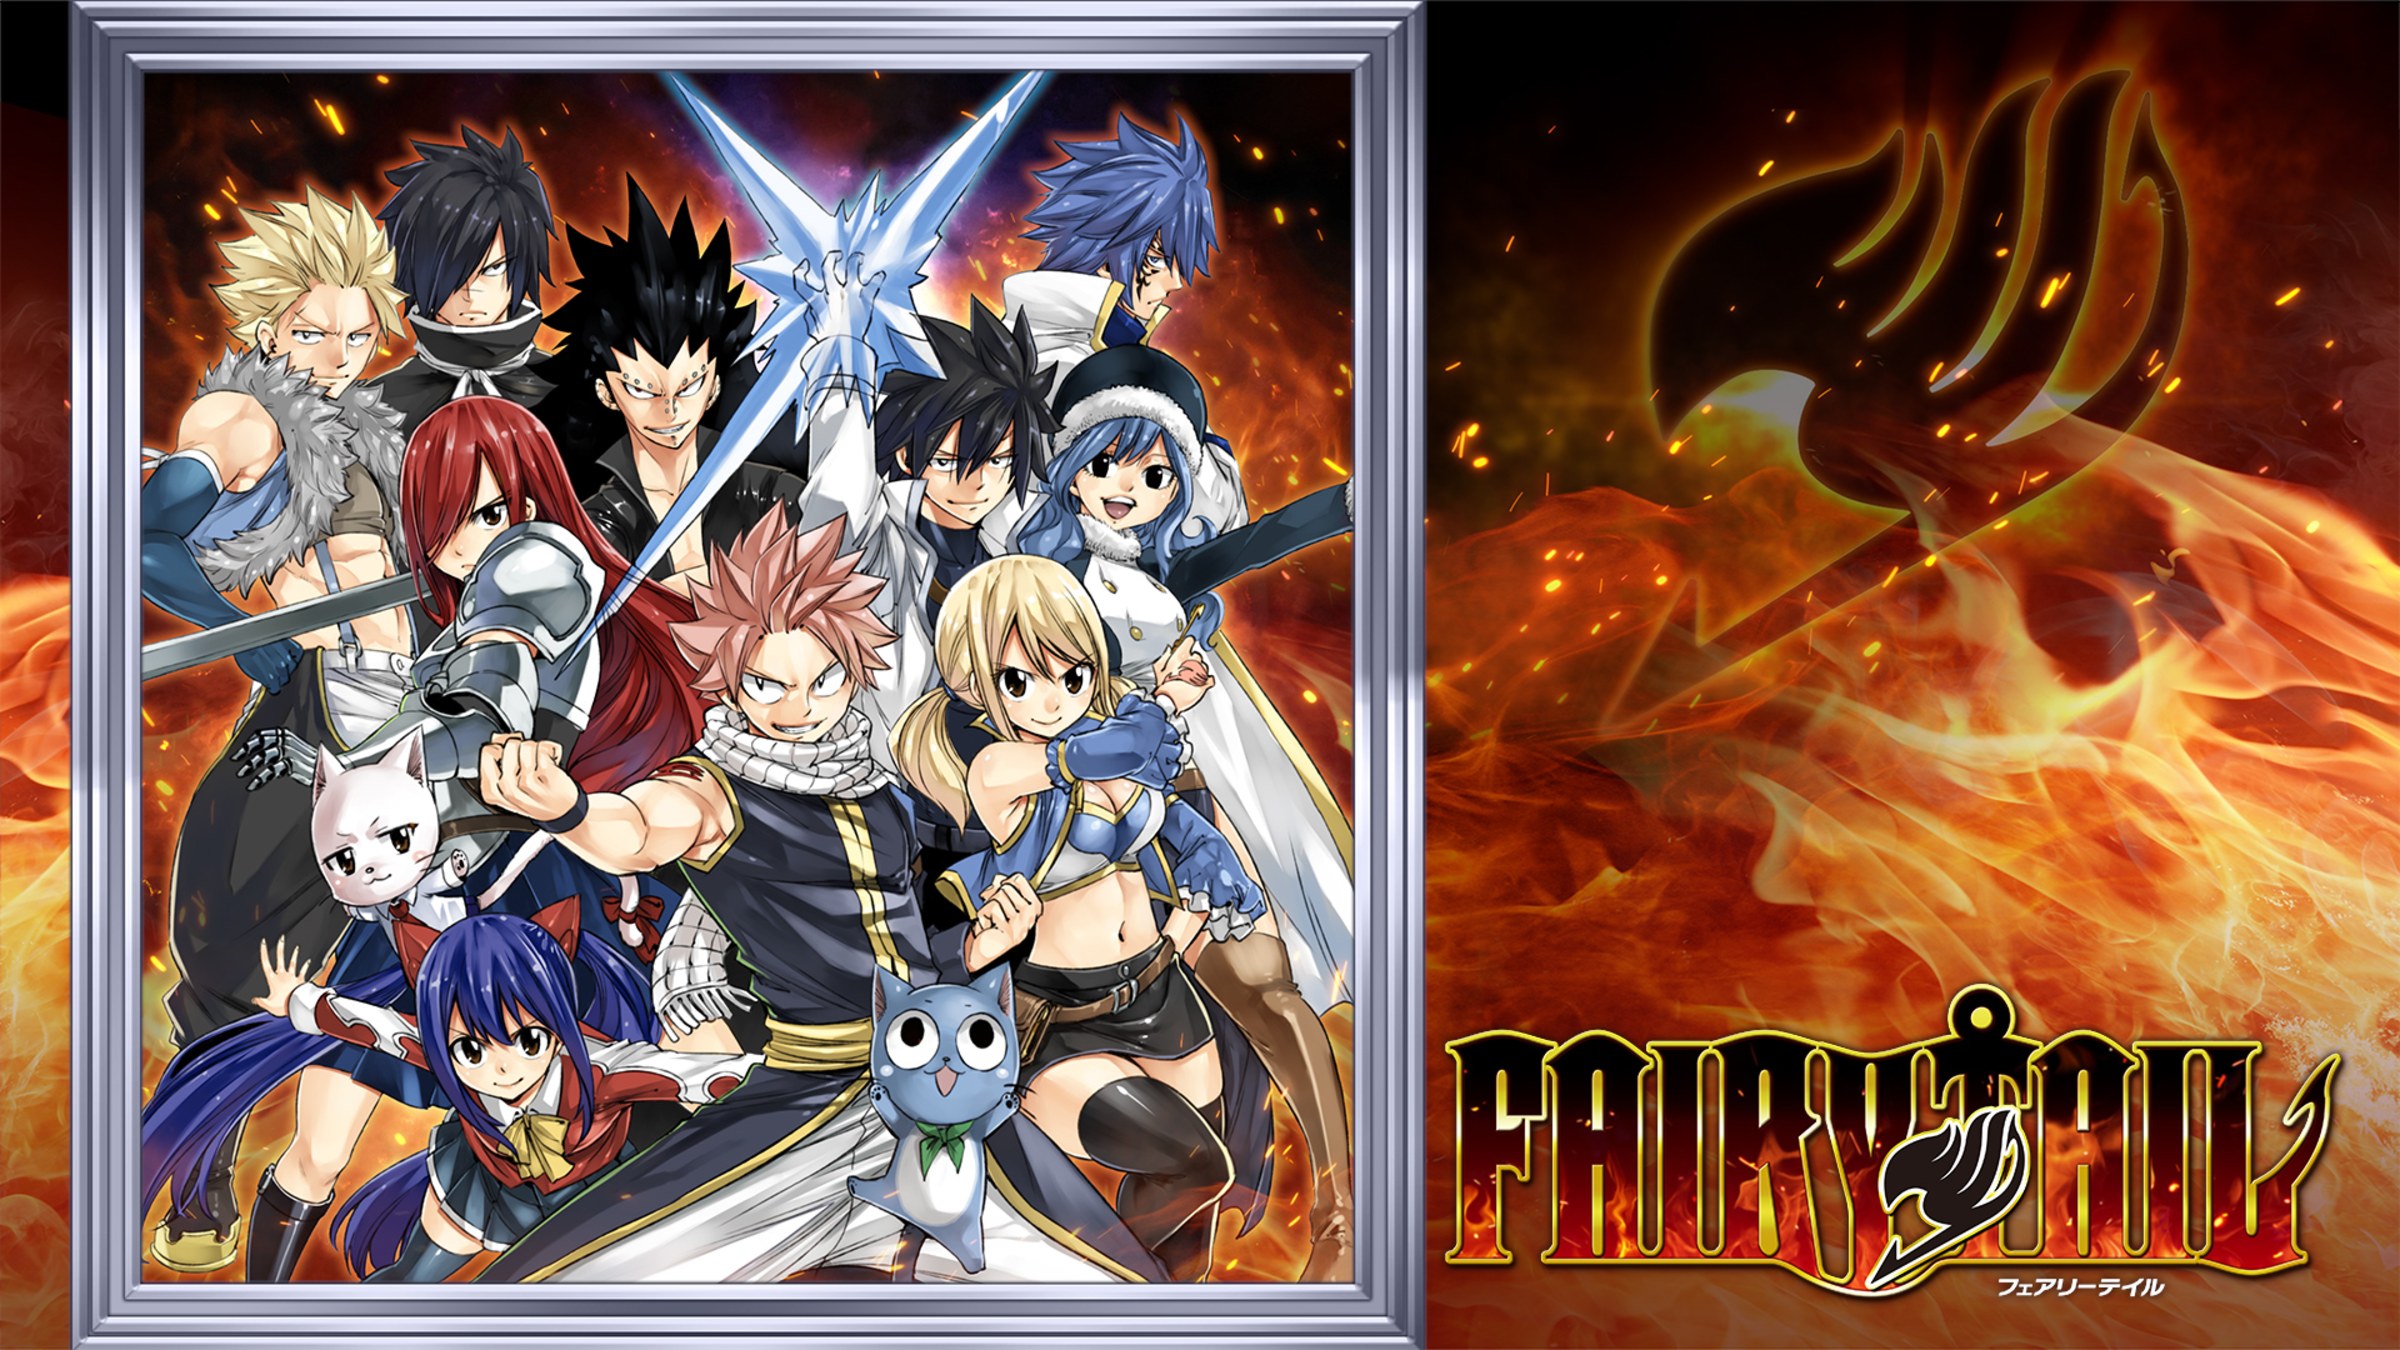 ana lebnani recommends Fairy Tail Episodes Download